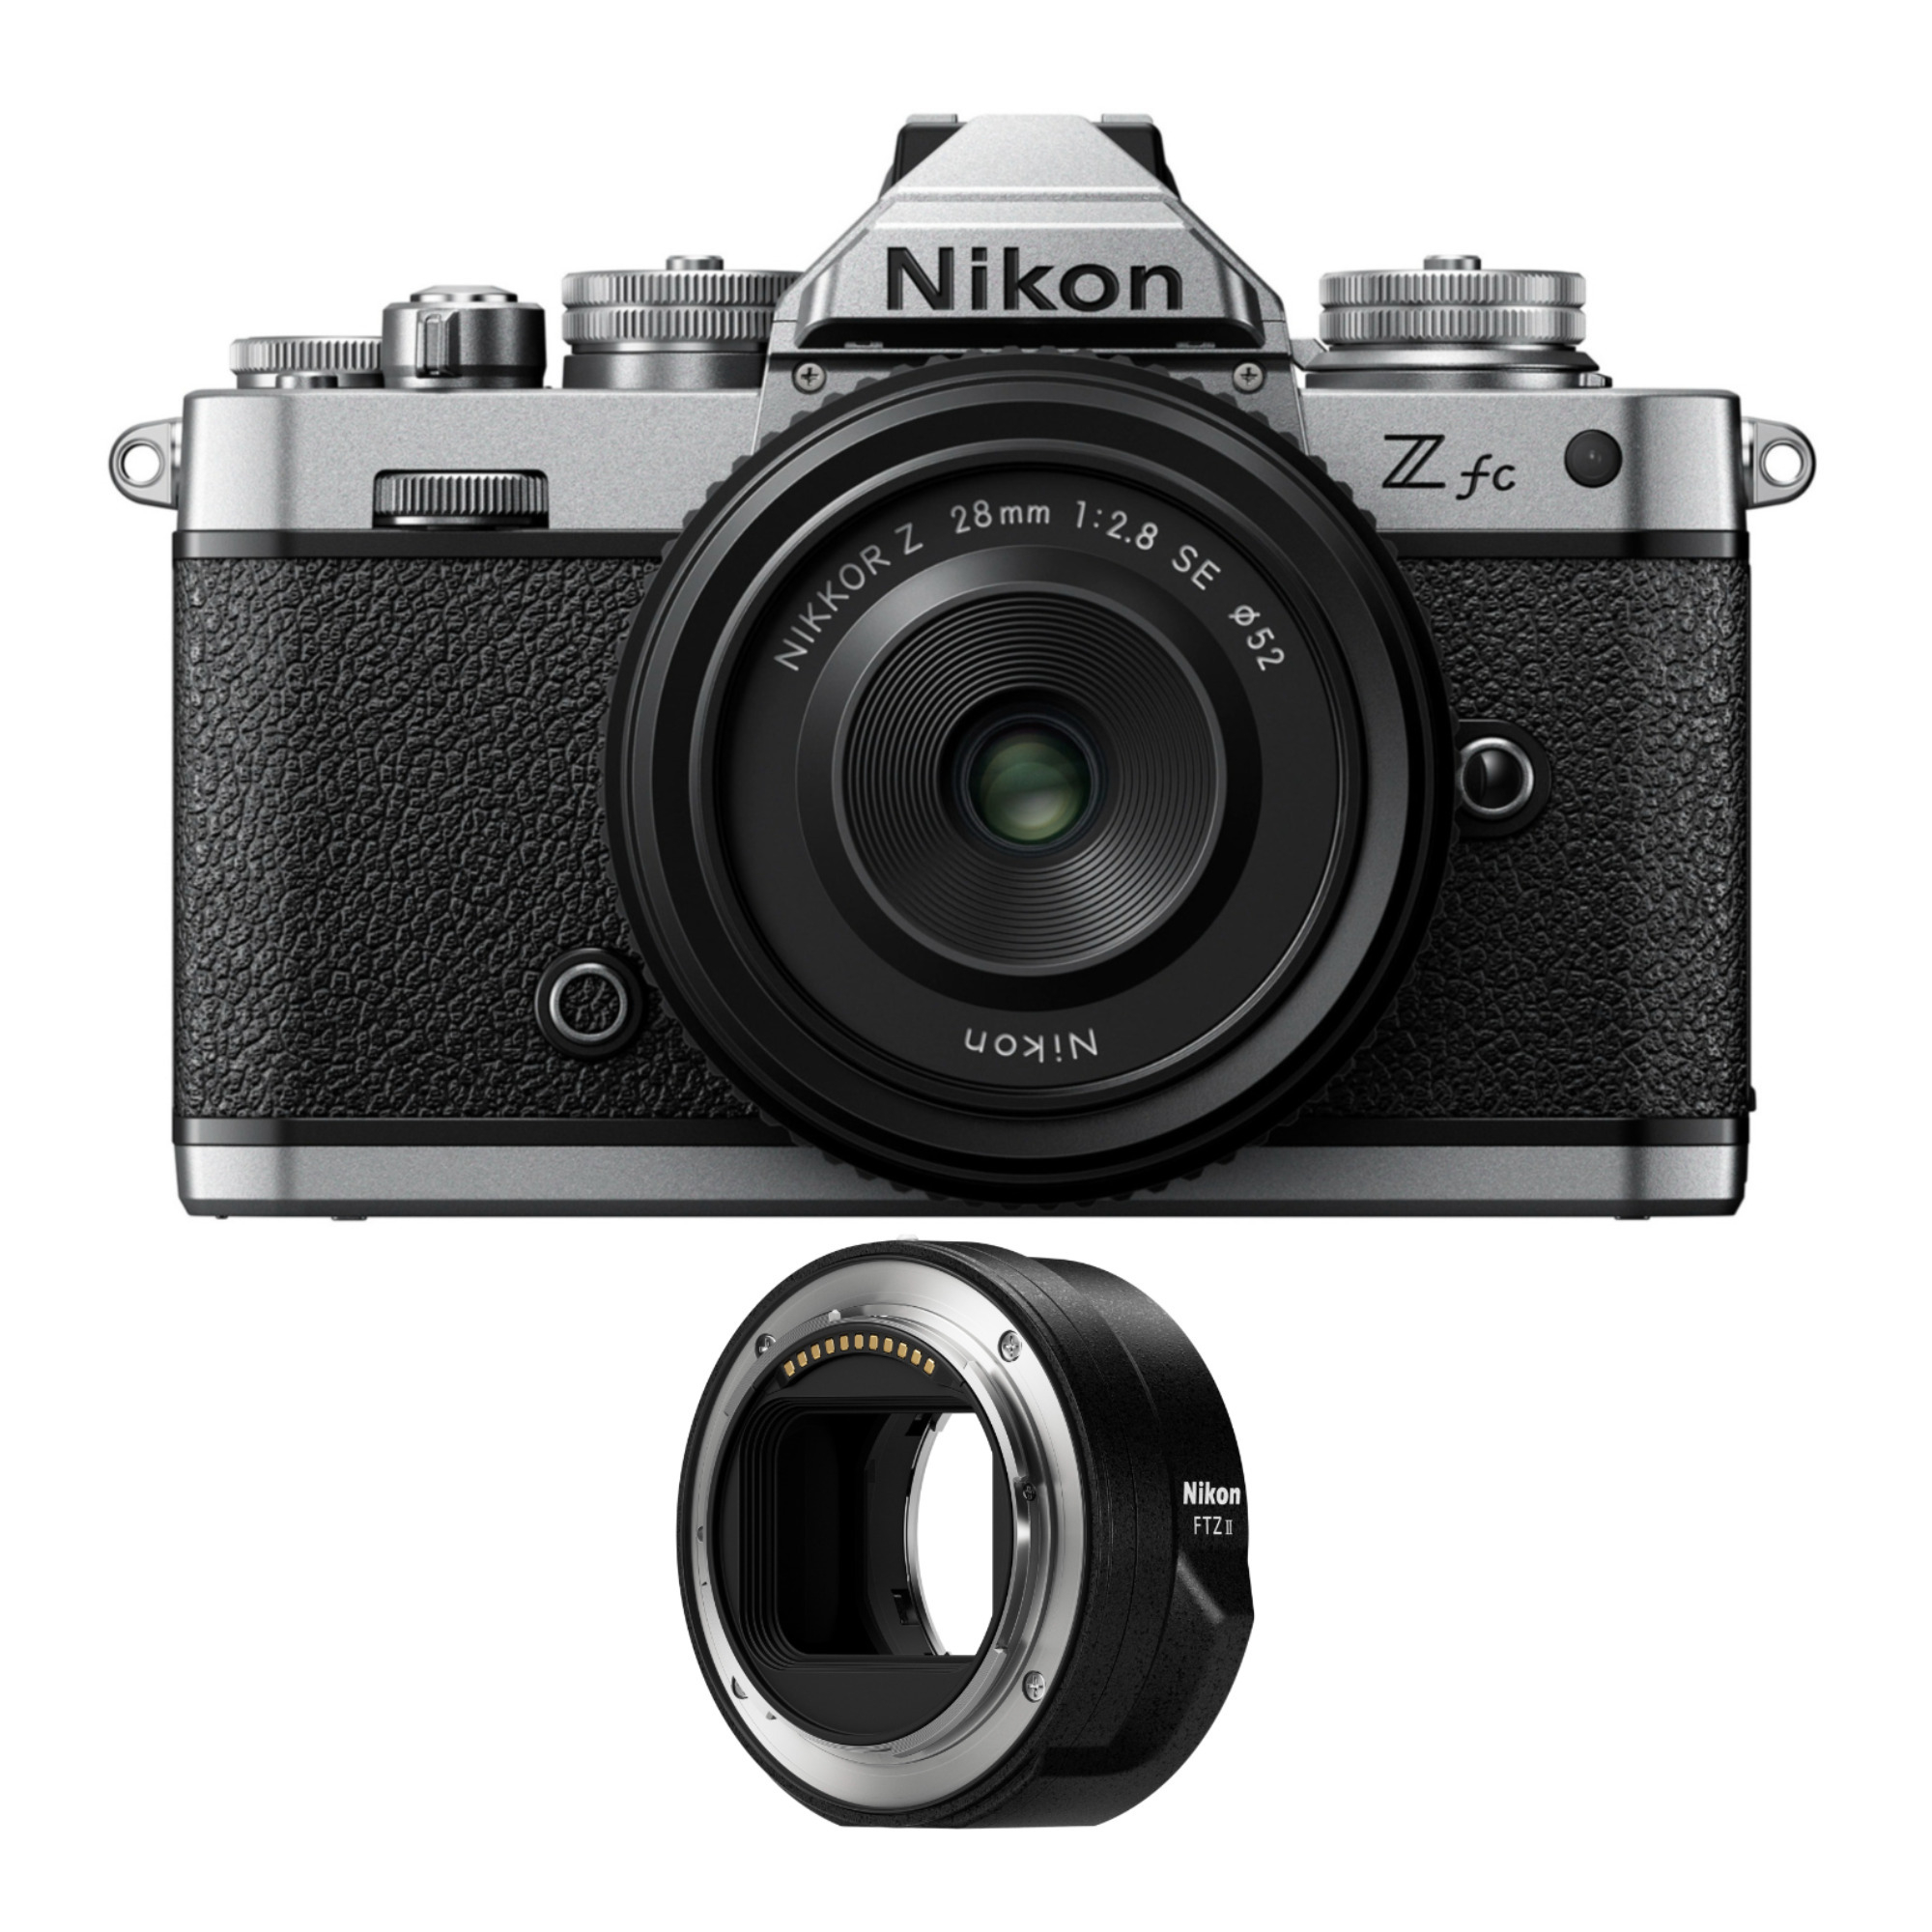 Nikon Zfc Mirrorless Camera with 28mm Camera Lens and FTZ II Mount Adapter in Black